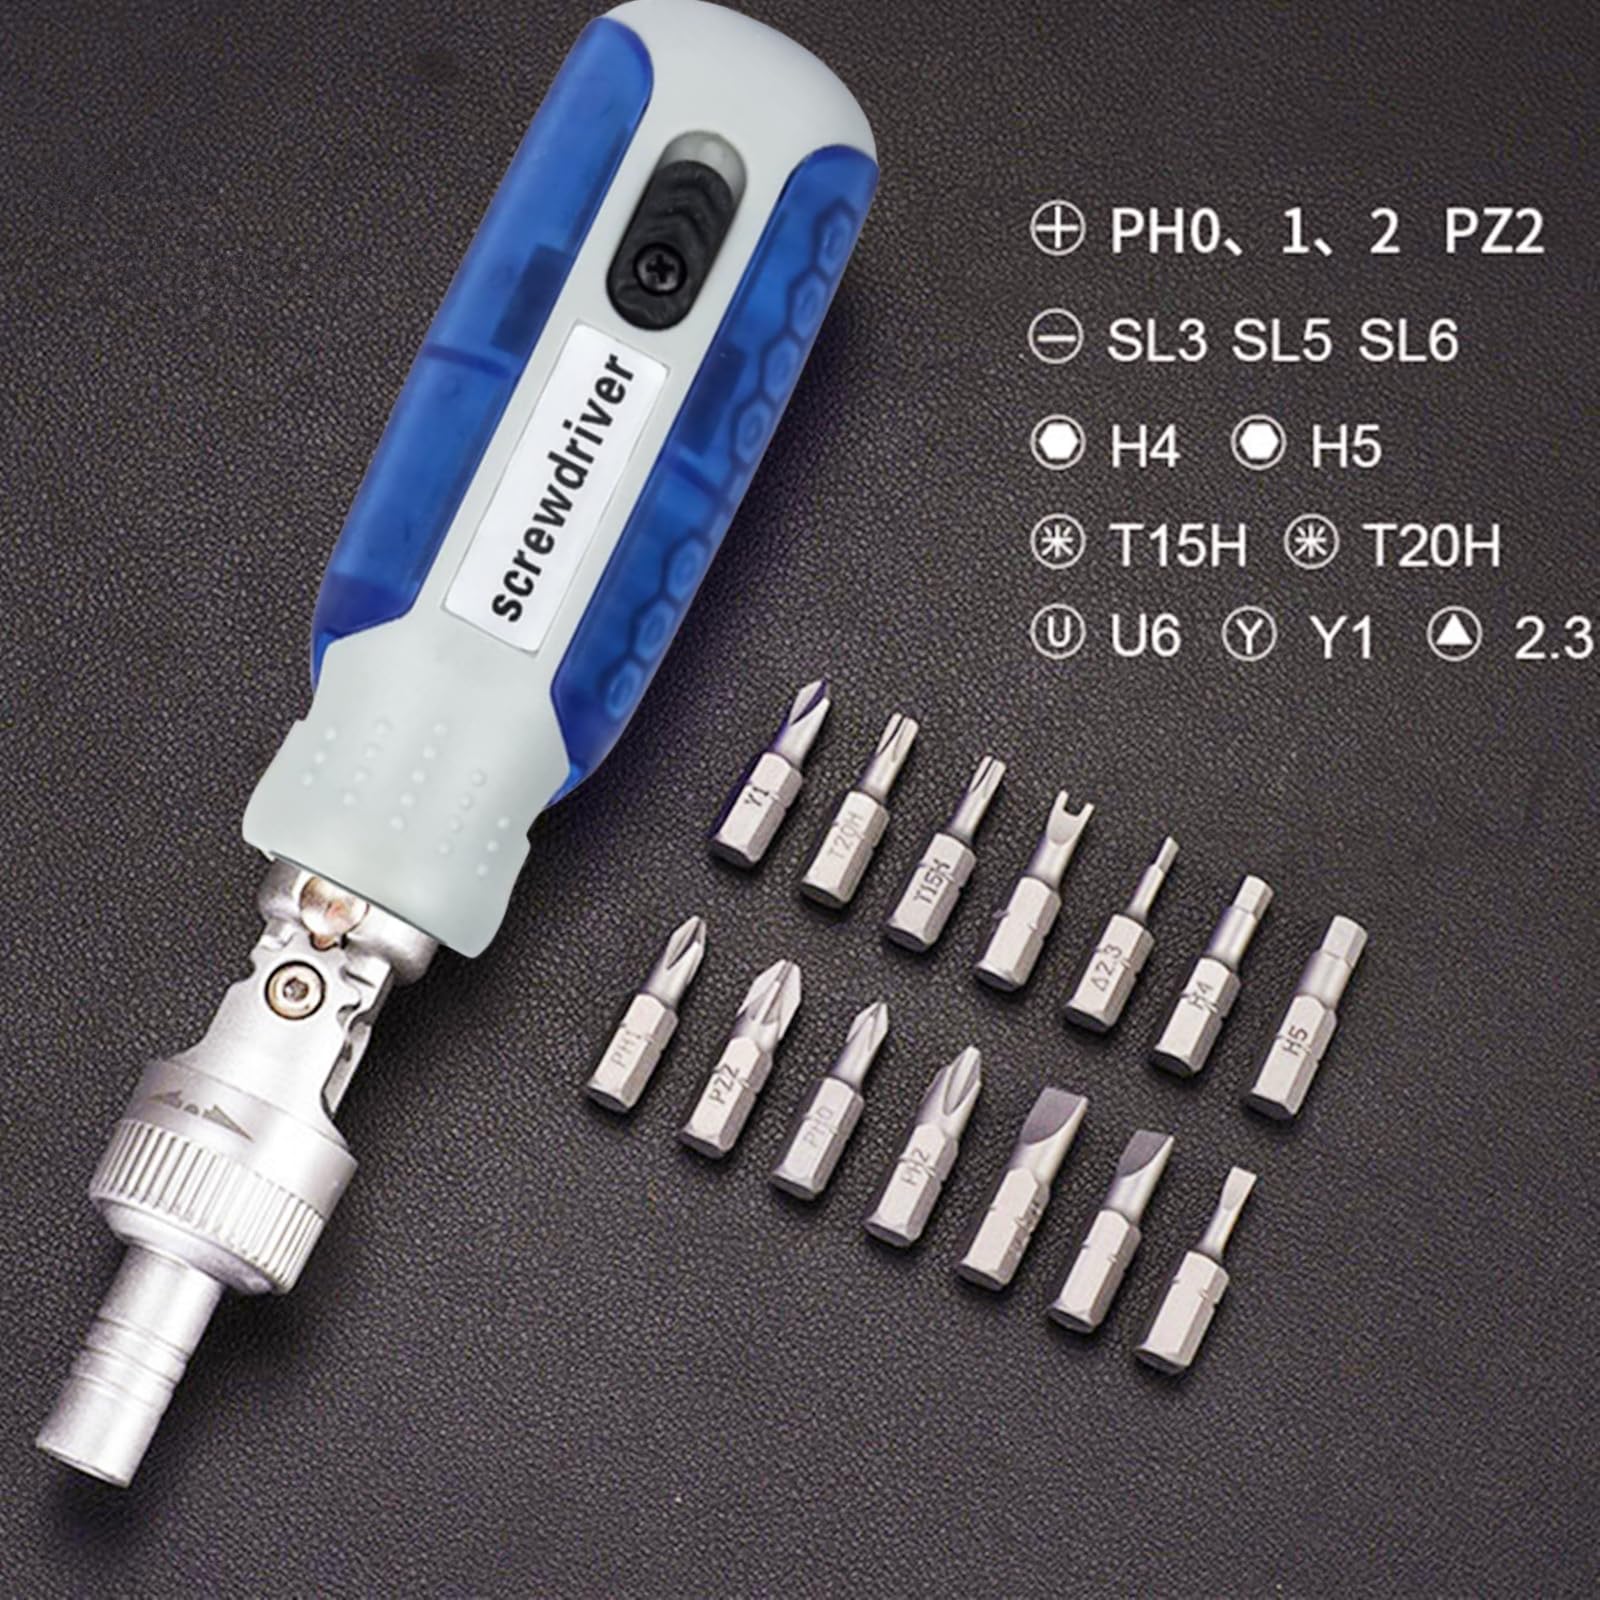 LIUZEYUAN Magnetic Ratchet Screwdriver Set 14 in 1 Multi Screwdriver,Ratchet and Adjustable Rotary Angle Screwdriver Repair Tool with 14 pcs S2 Alloy Steel Bits for DIY, Home, Repair Work